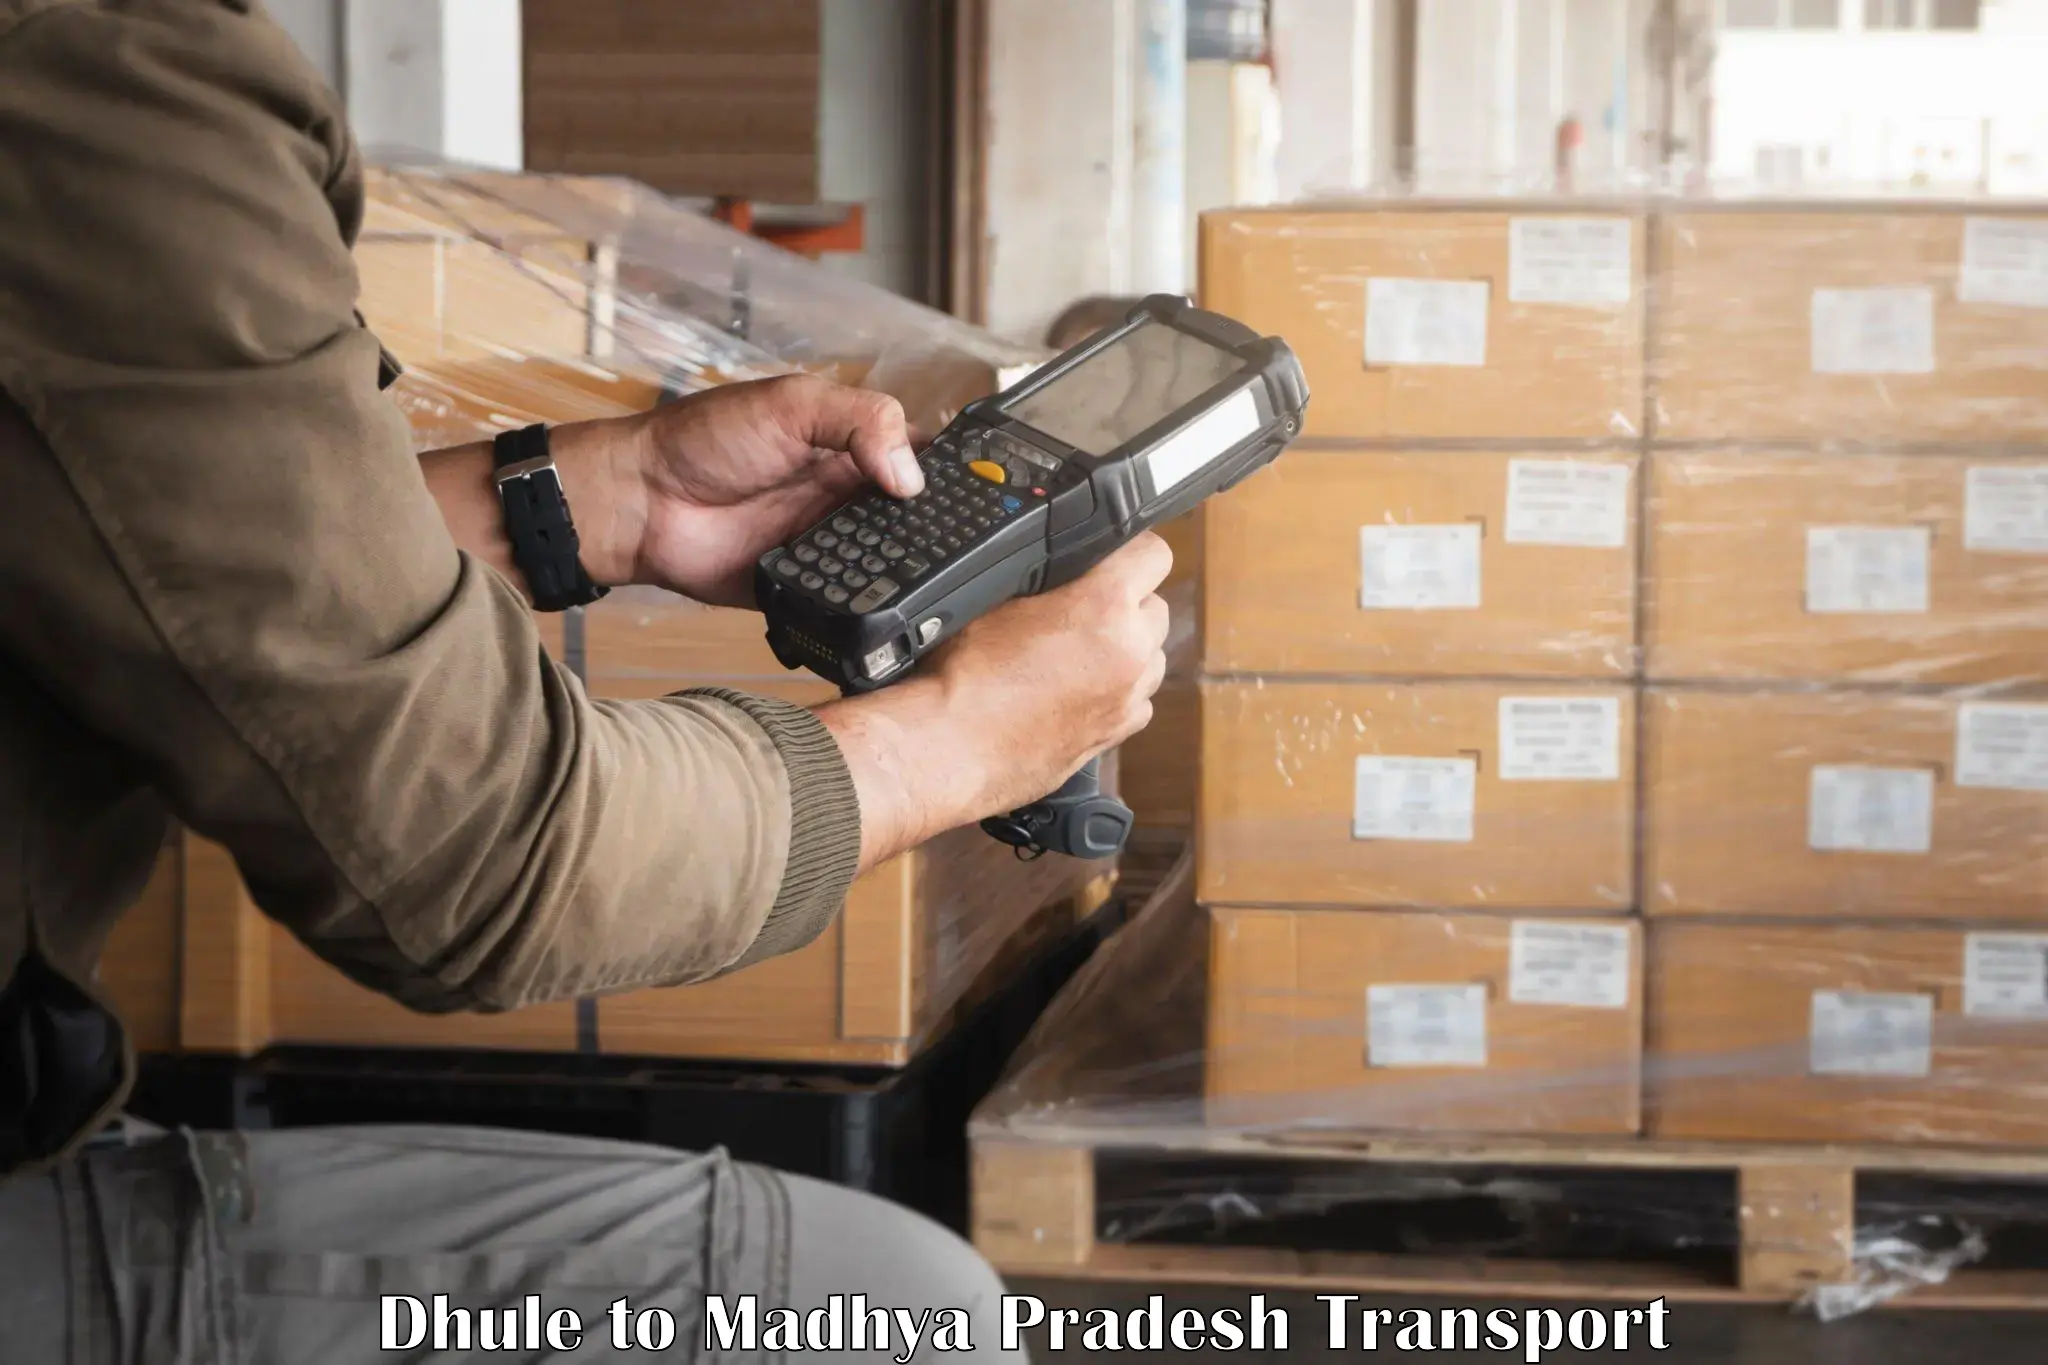 Cargo transport services Dhule to Dewas